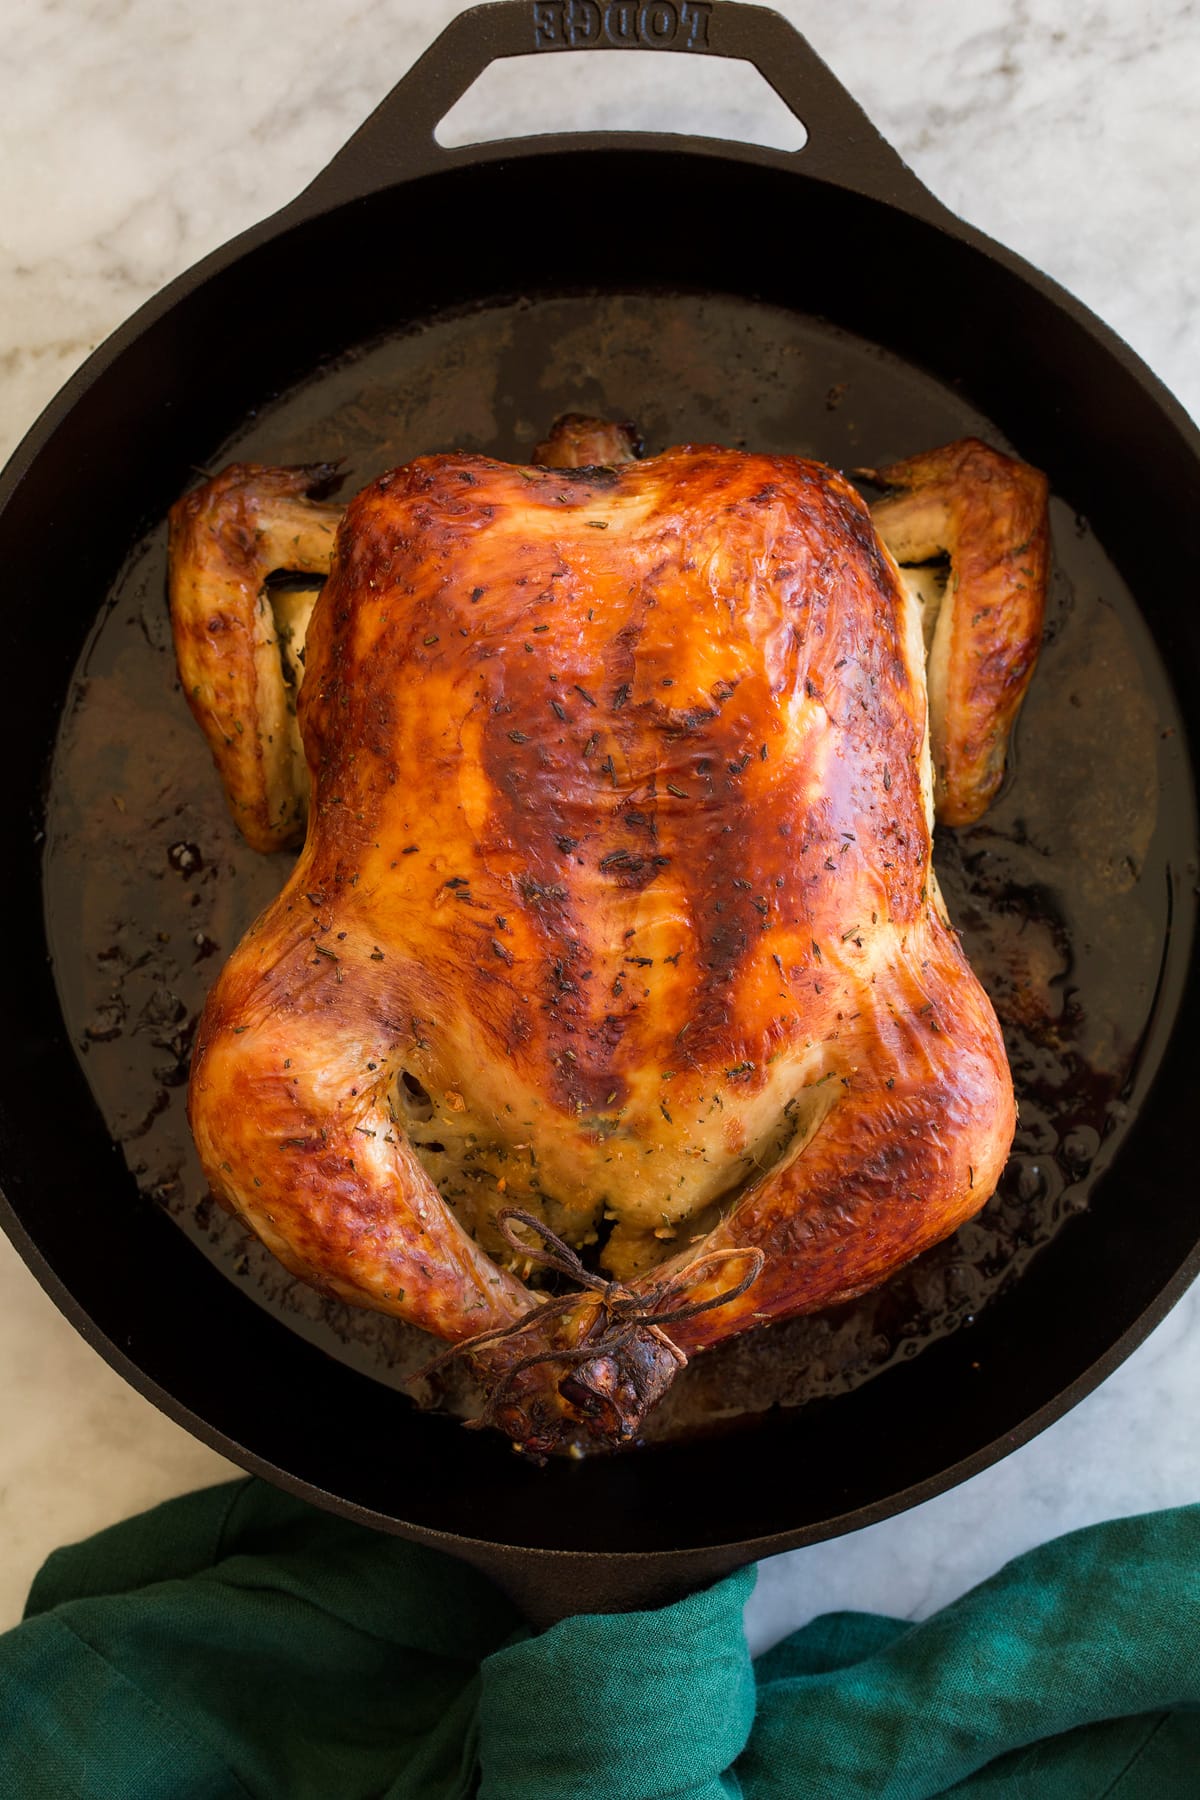 Whole brined and roast chicken shown overhead in a cast iron skillet.